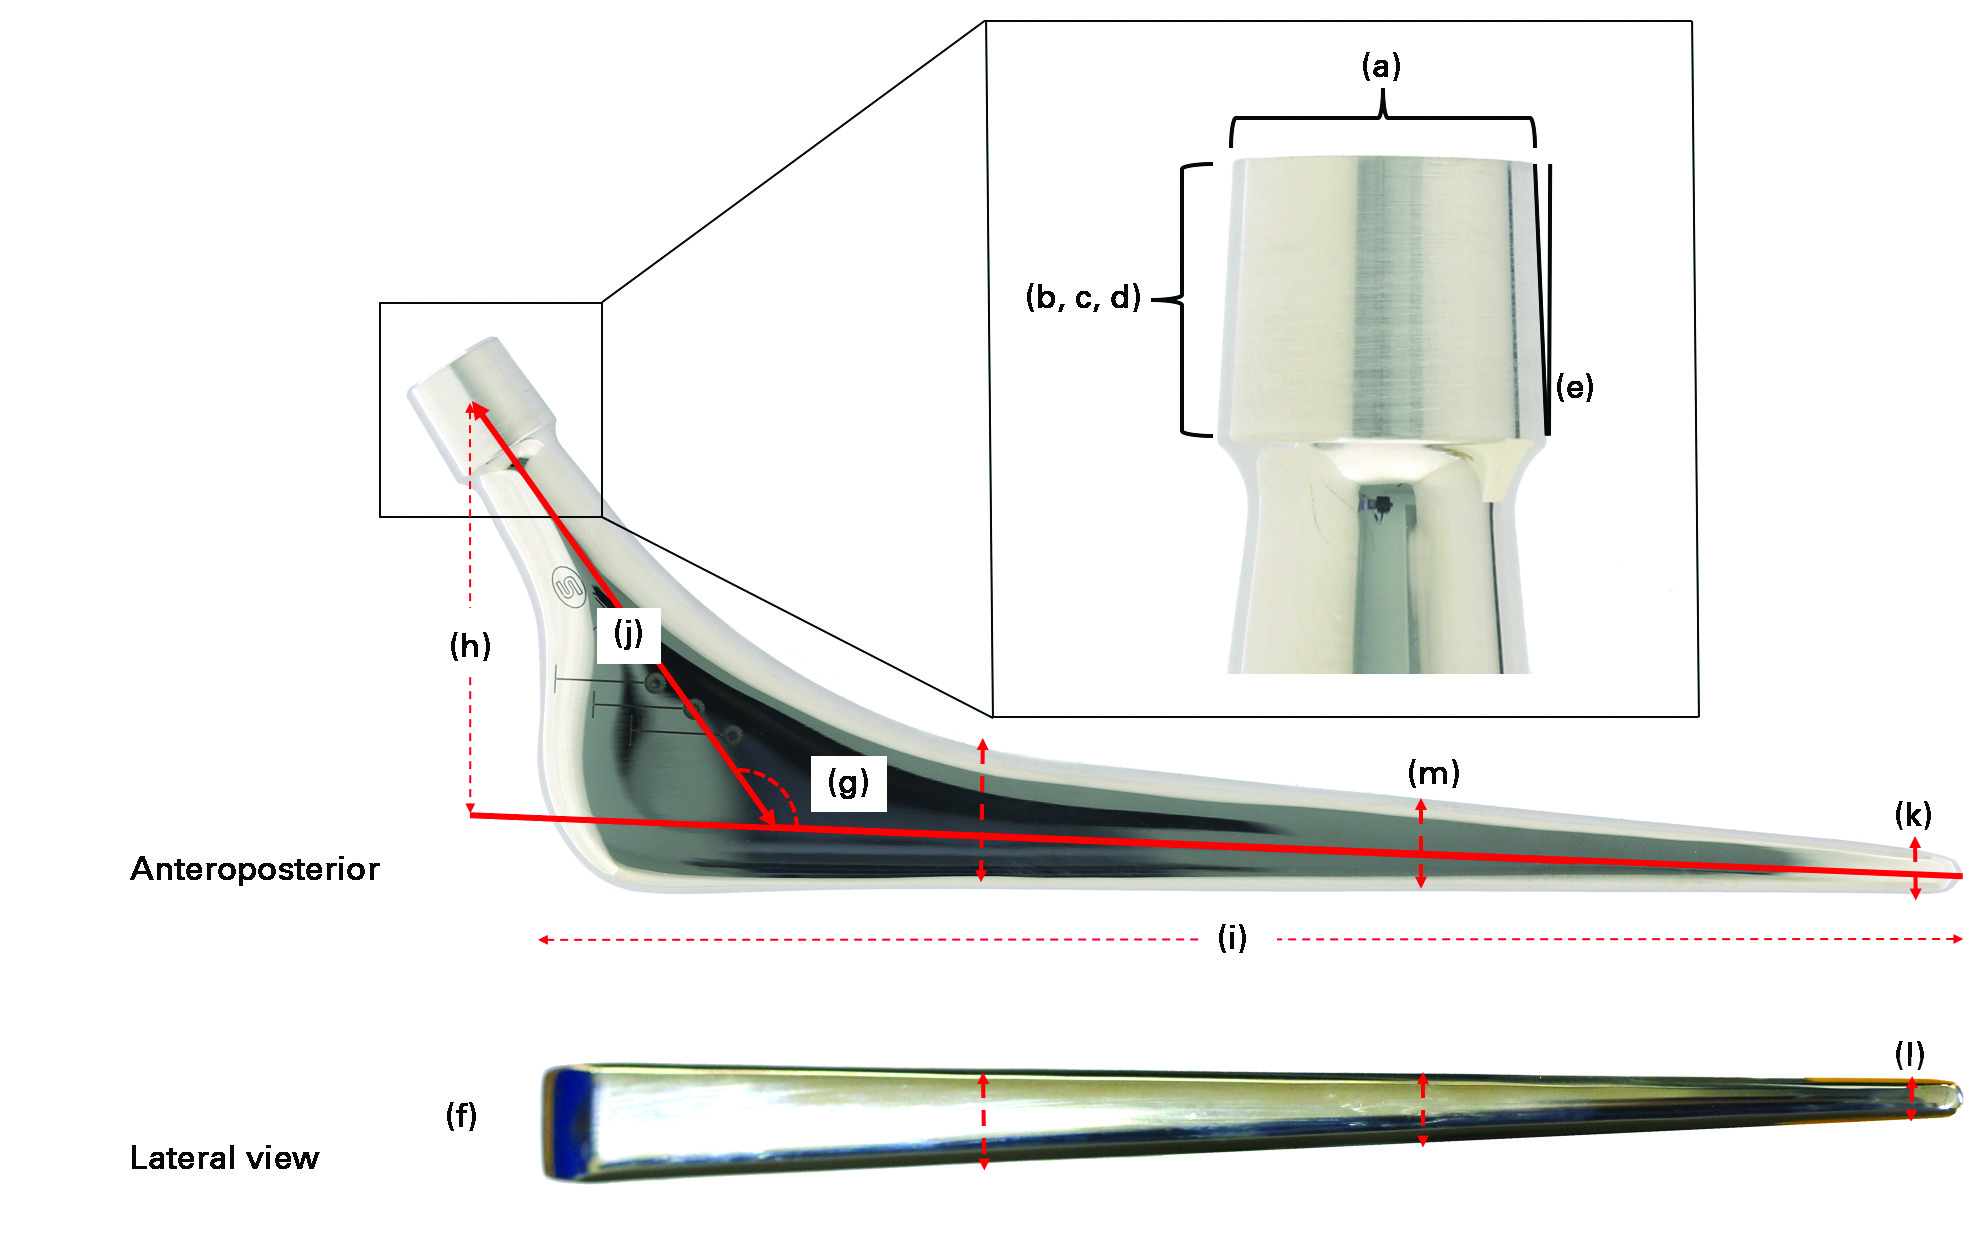 Fig. 2 
          Summary of the stem design parameters
that were investigated: (a) trunnion diameter; (b) thread height;
(c) thread spacing; (d) trunnion roughness; (e) cone angle; (f)
stem mass and volume; (g) CCD angle; (h) femoral offset; (i) stem
length; (j) neck length; (k) shaft width in an anteroposterior view
at 2 mm, 50 mm and 100 mm from the stem tip; (l) width in lateral
view at 2 mm, 50 mm and 100 mm from the stem tip; and (m) surface
roughness at 2 mm, 50 mm and 100 mm from the step tip.
        